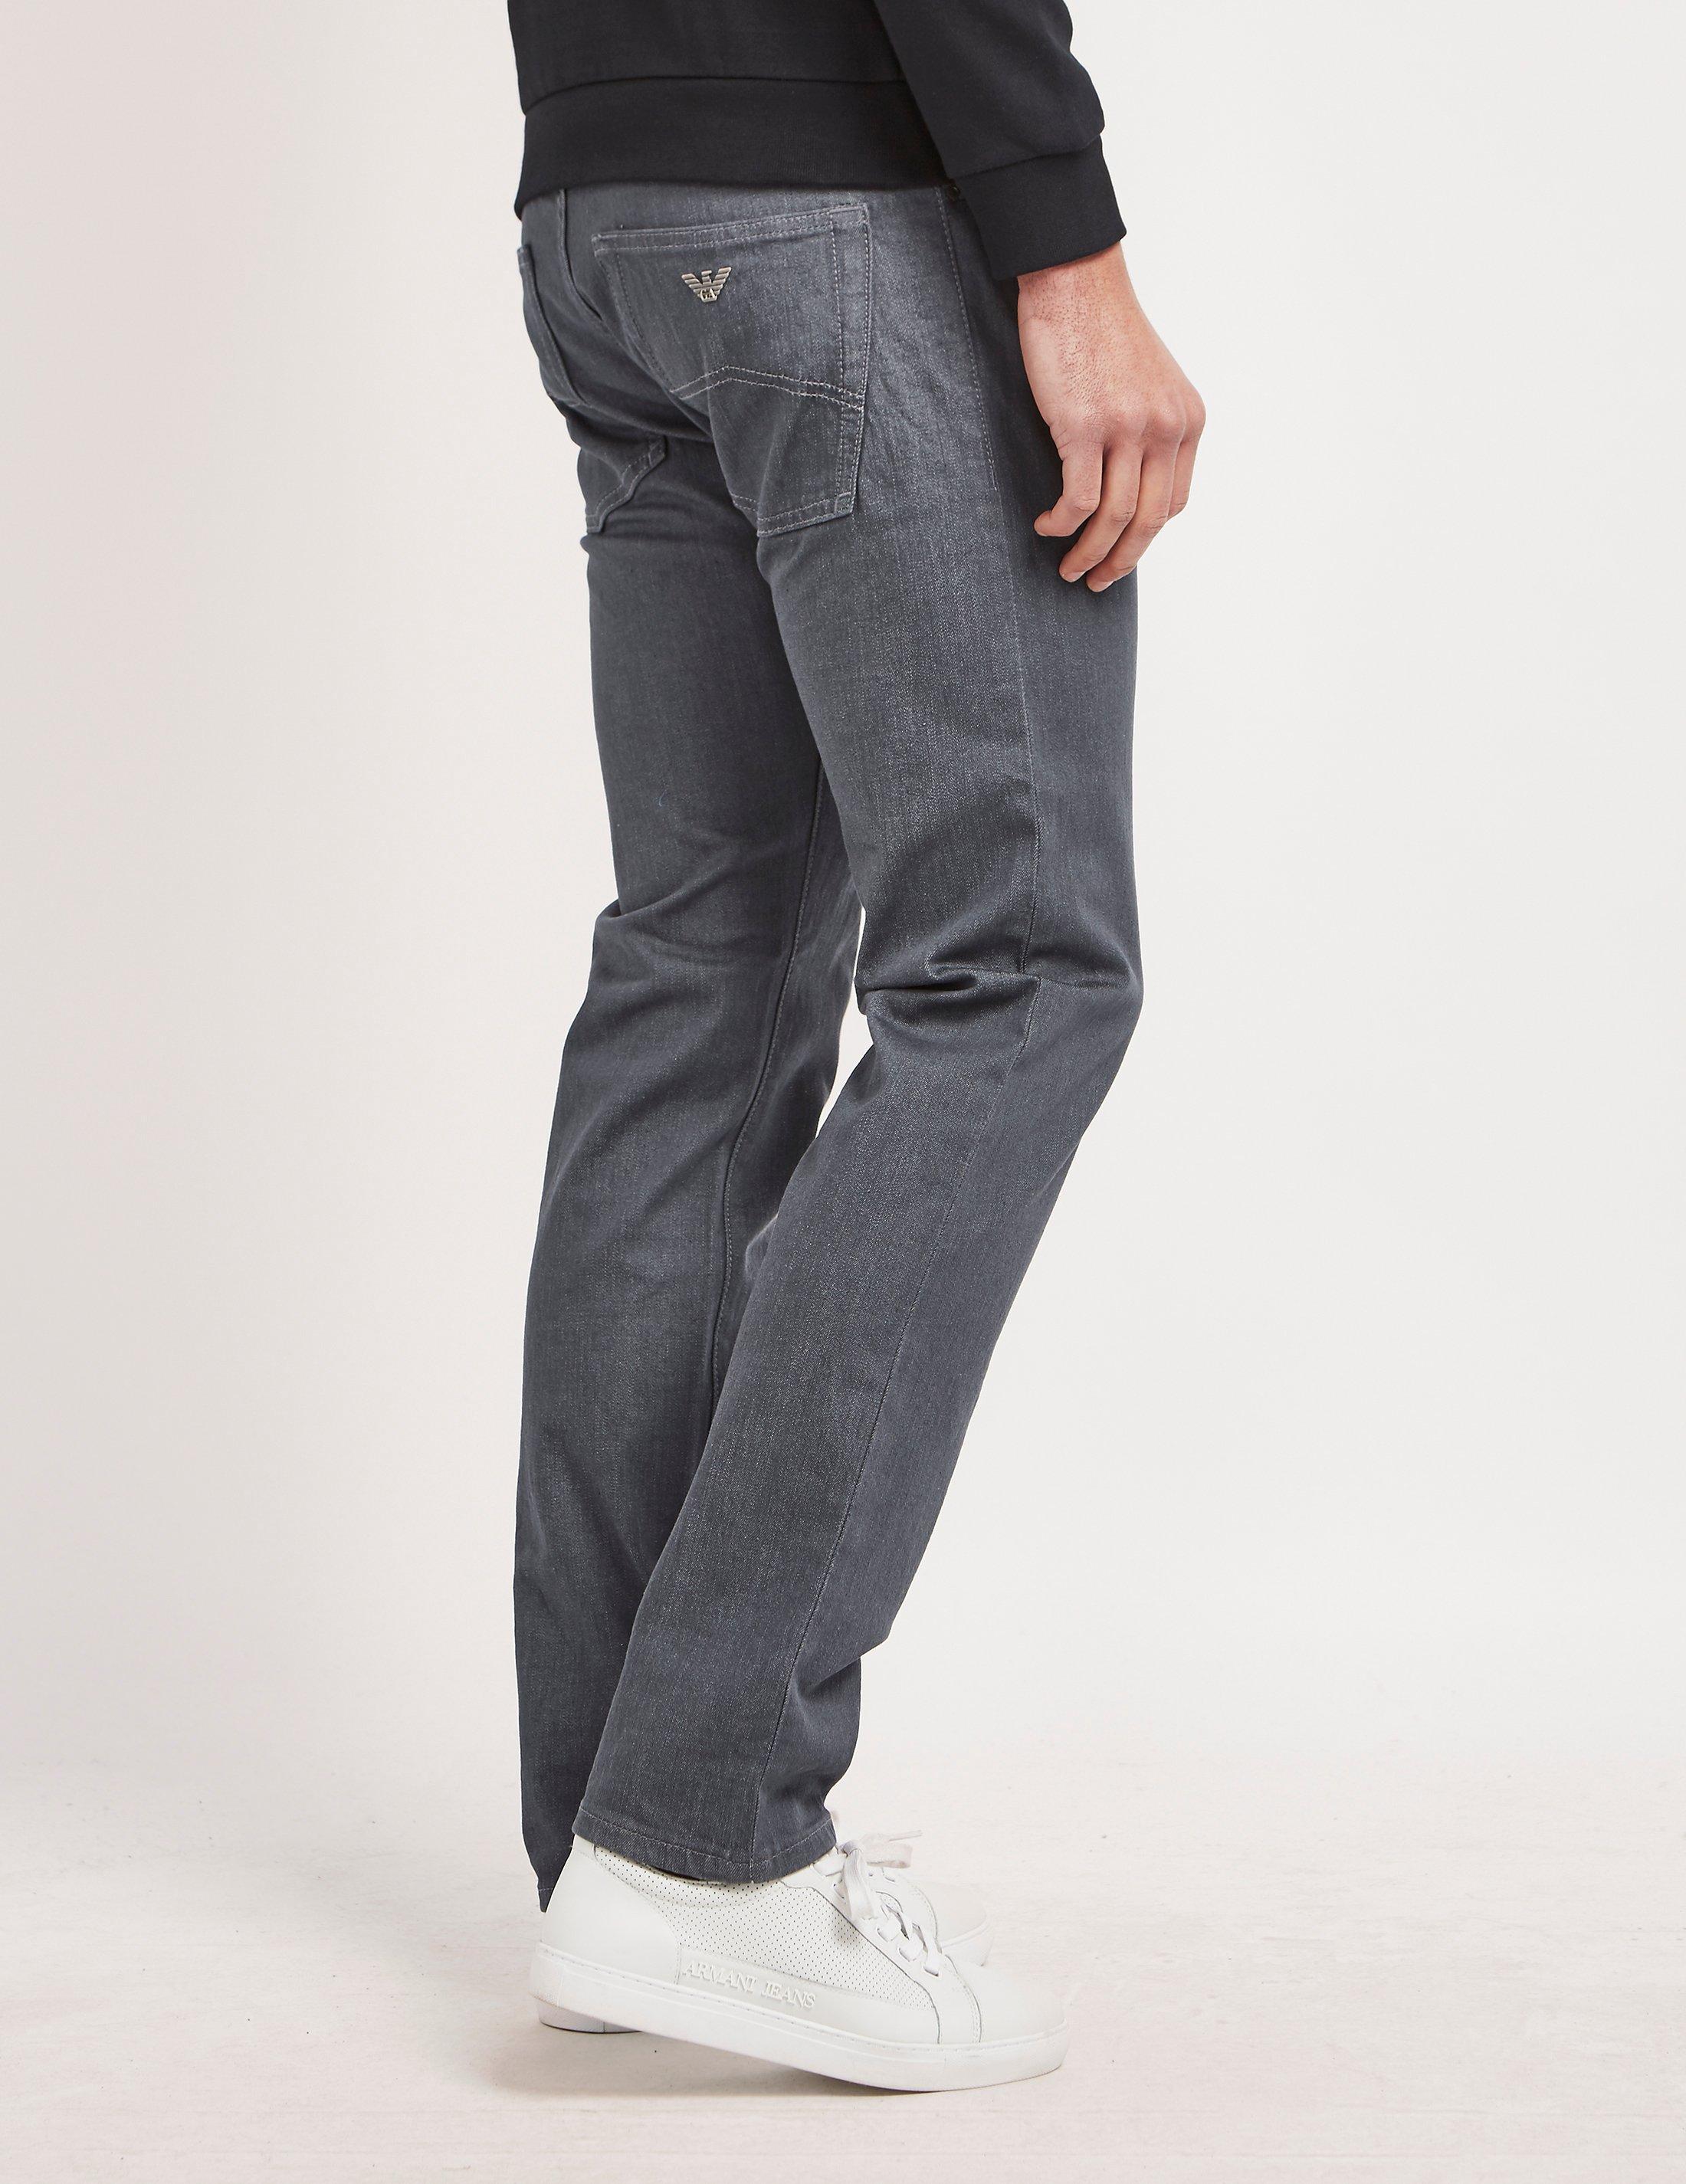 armani grey jeans mens - OFF-61% > Shipping free